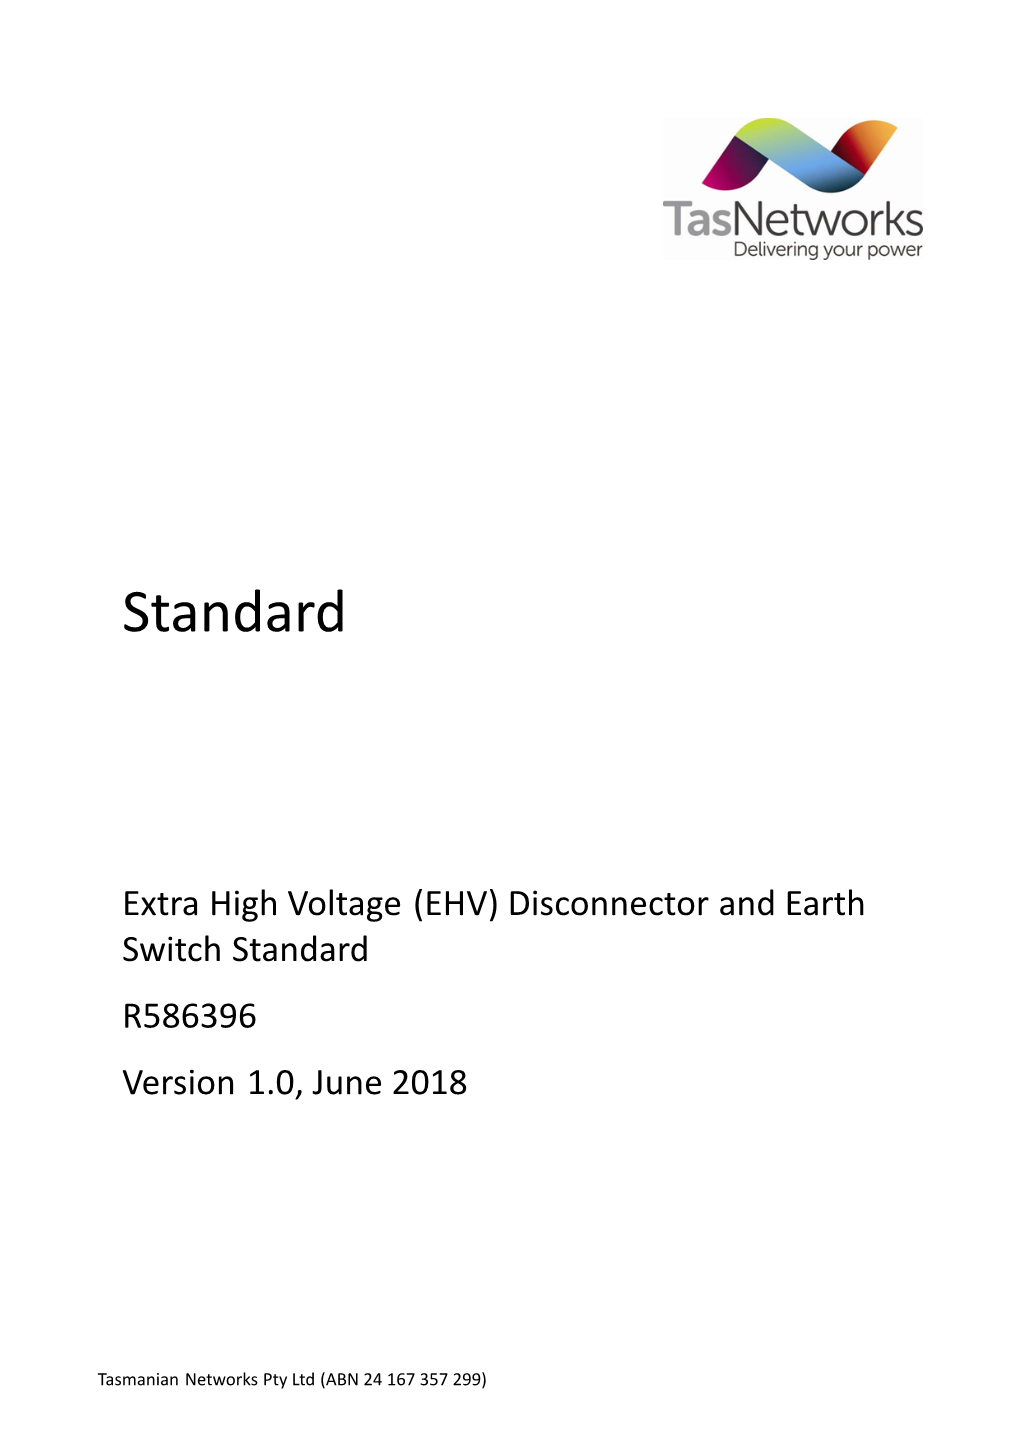 EHV Disconnector and Earth Switch Standard Record of Revisions